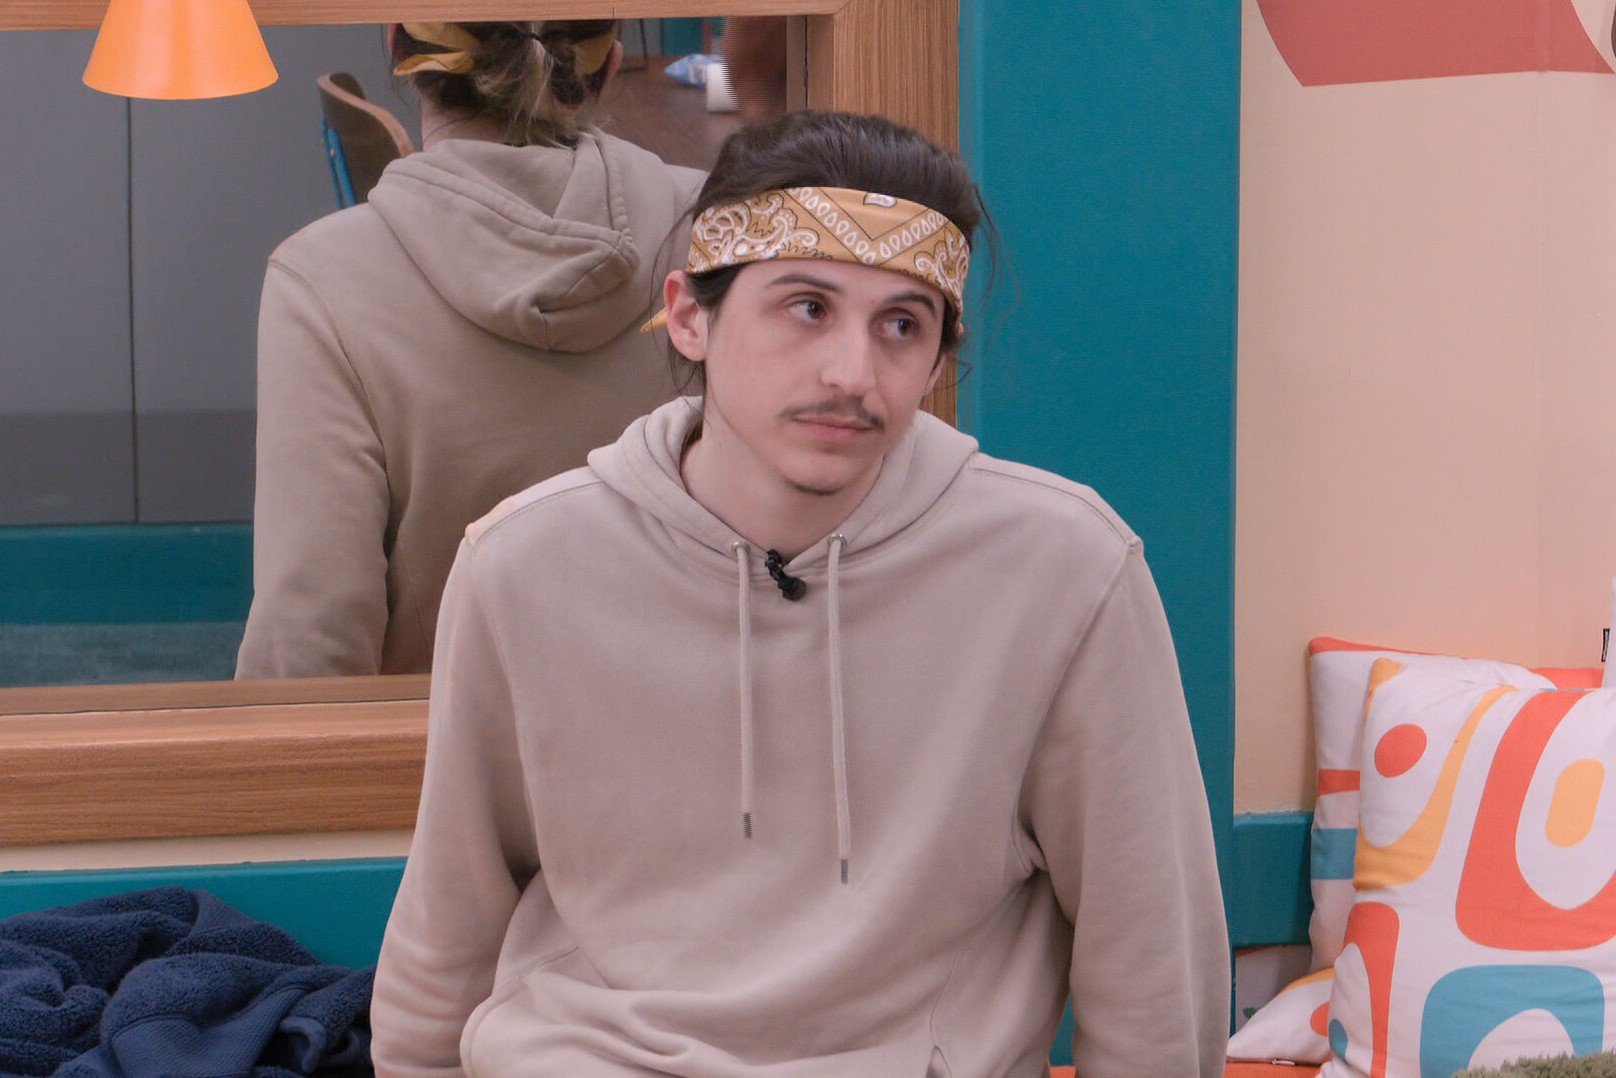 Matthew Turner, who is not currently a part of the 'Big Brother 24' jury, wears a light tan hoodie and tan bandana around his head.